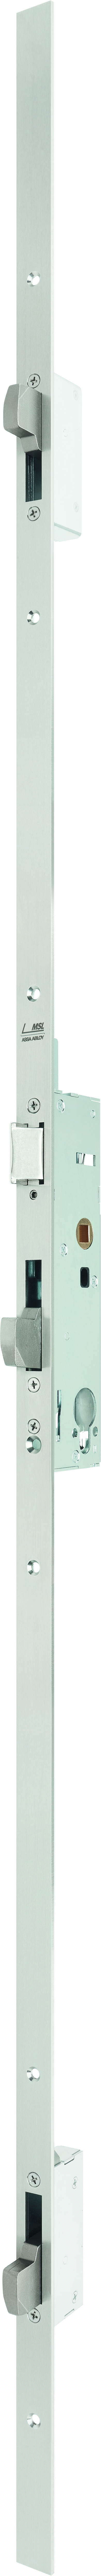 Security multi-point locking system with swing bolt 19351